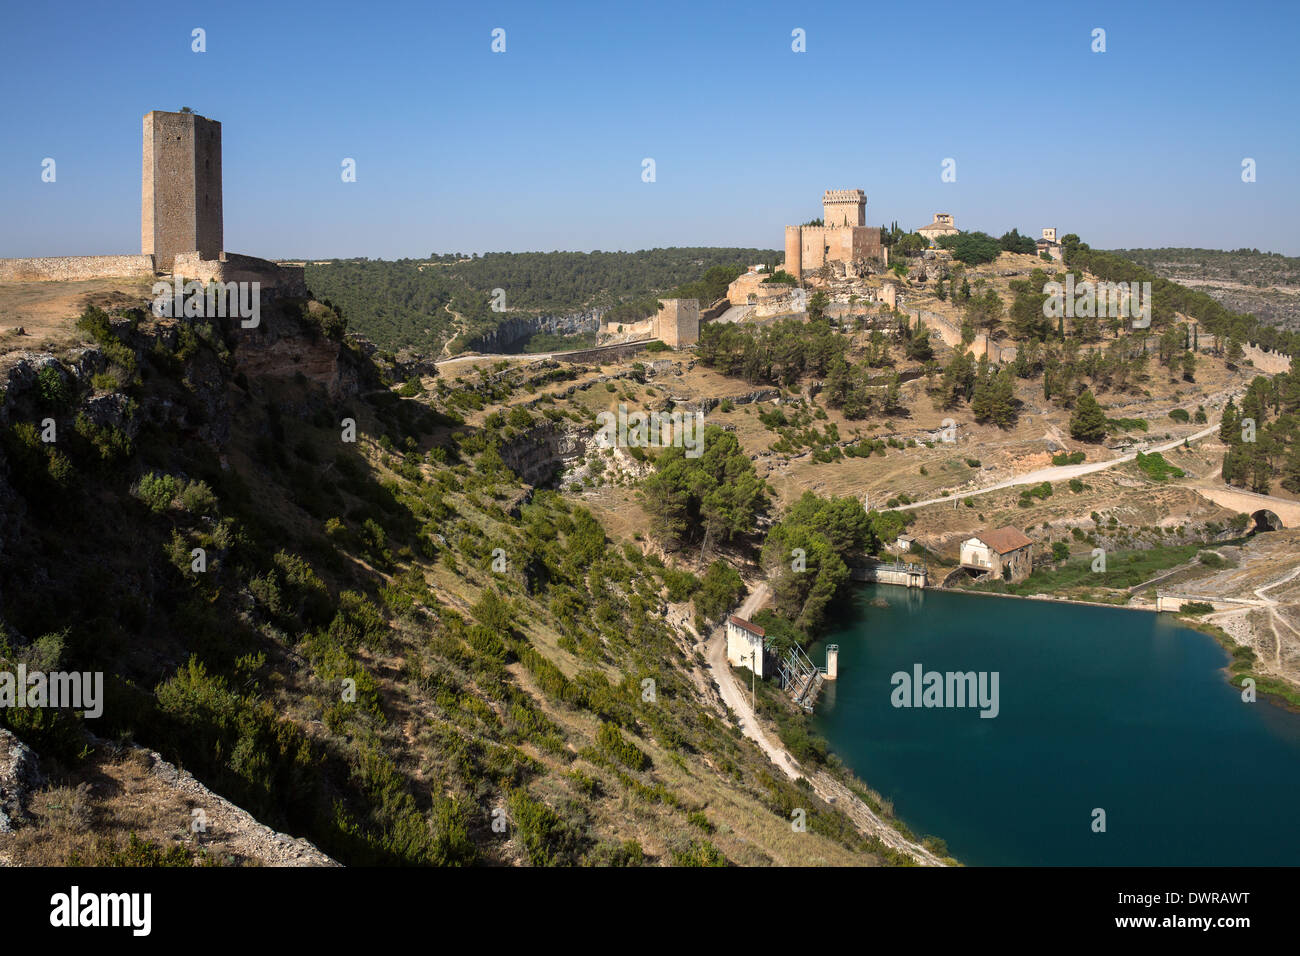 The castles and fortress of the medieval town of Alacon in the La Mancha region of central Spain. Stock Photo